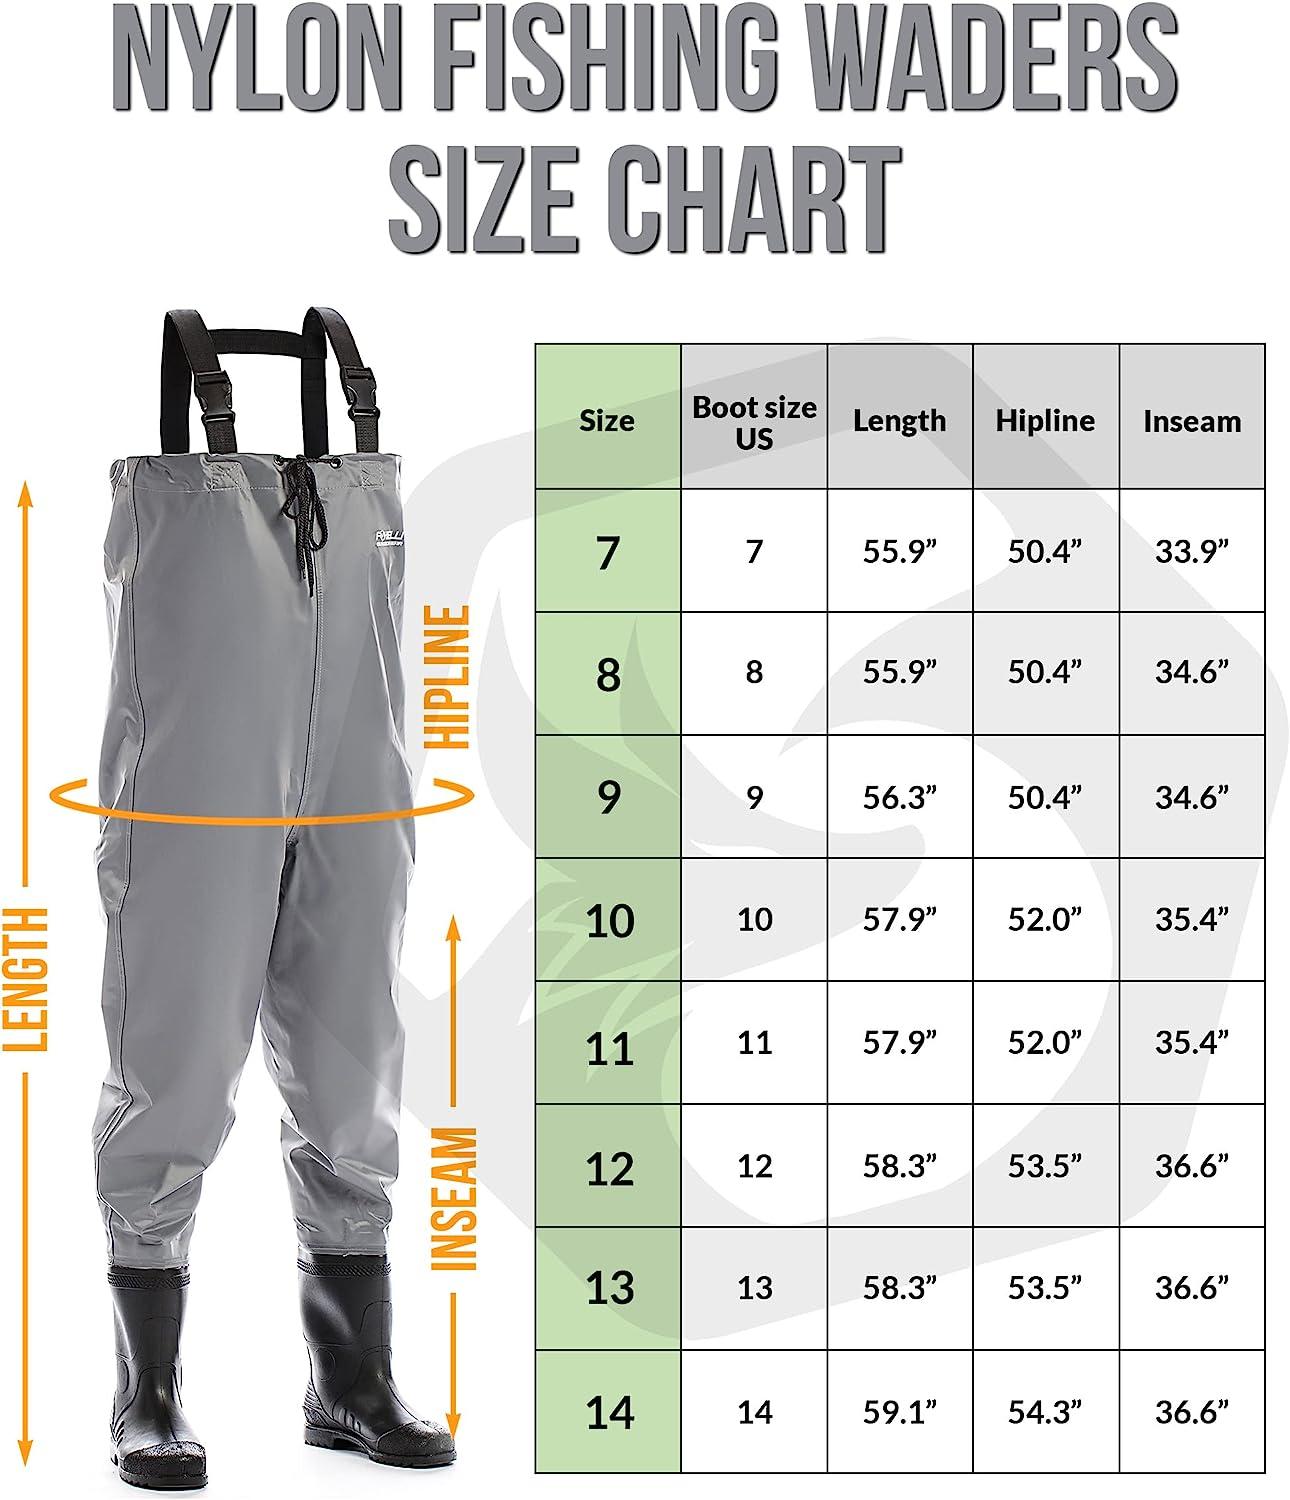 PVC Chest Waders Sizes 6 7 8 9 10 11 12 13 14 Fly Fishing Tackle